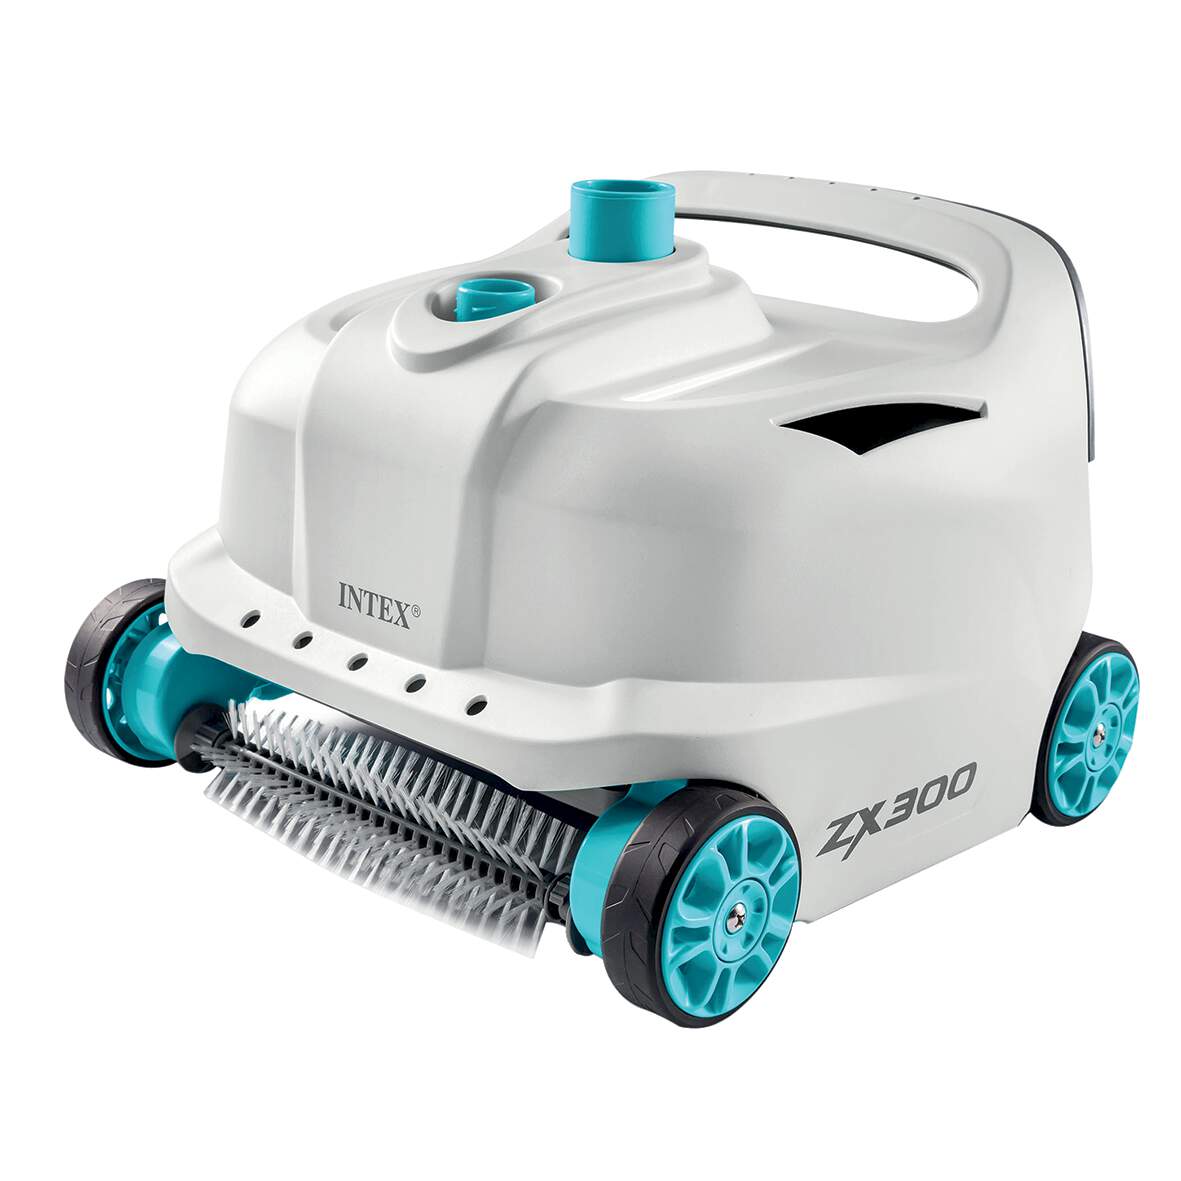 1271627 - Poolroboter Auto Pool Cleaner Deluxe ZX300